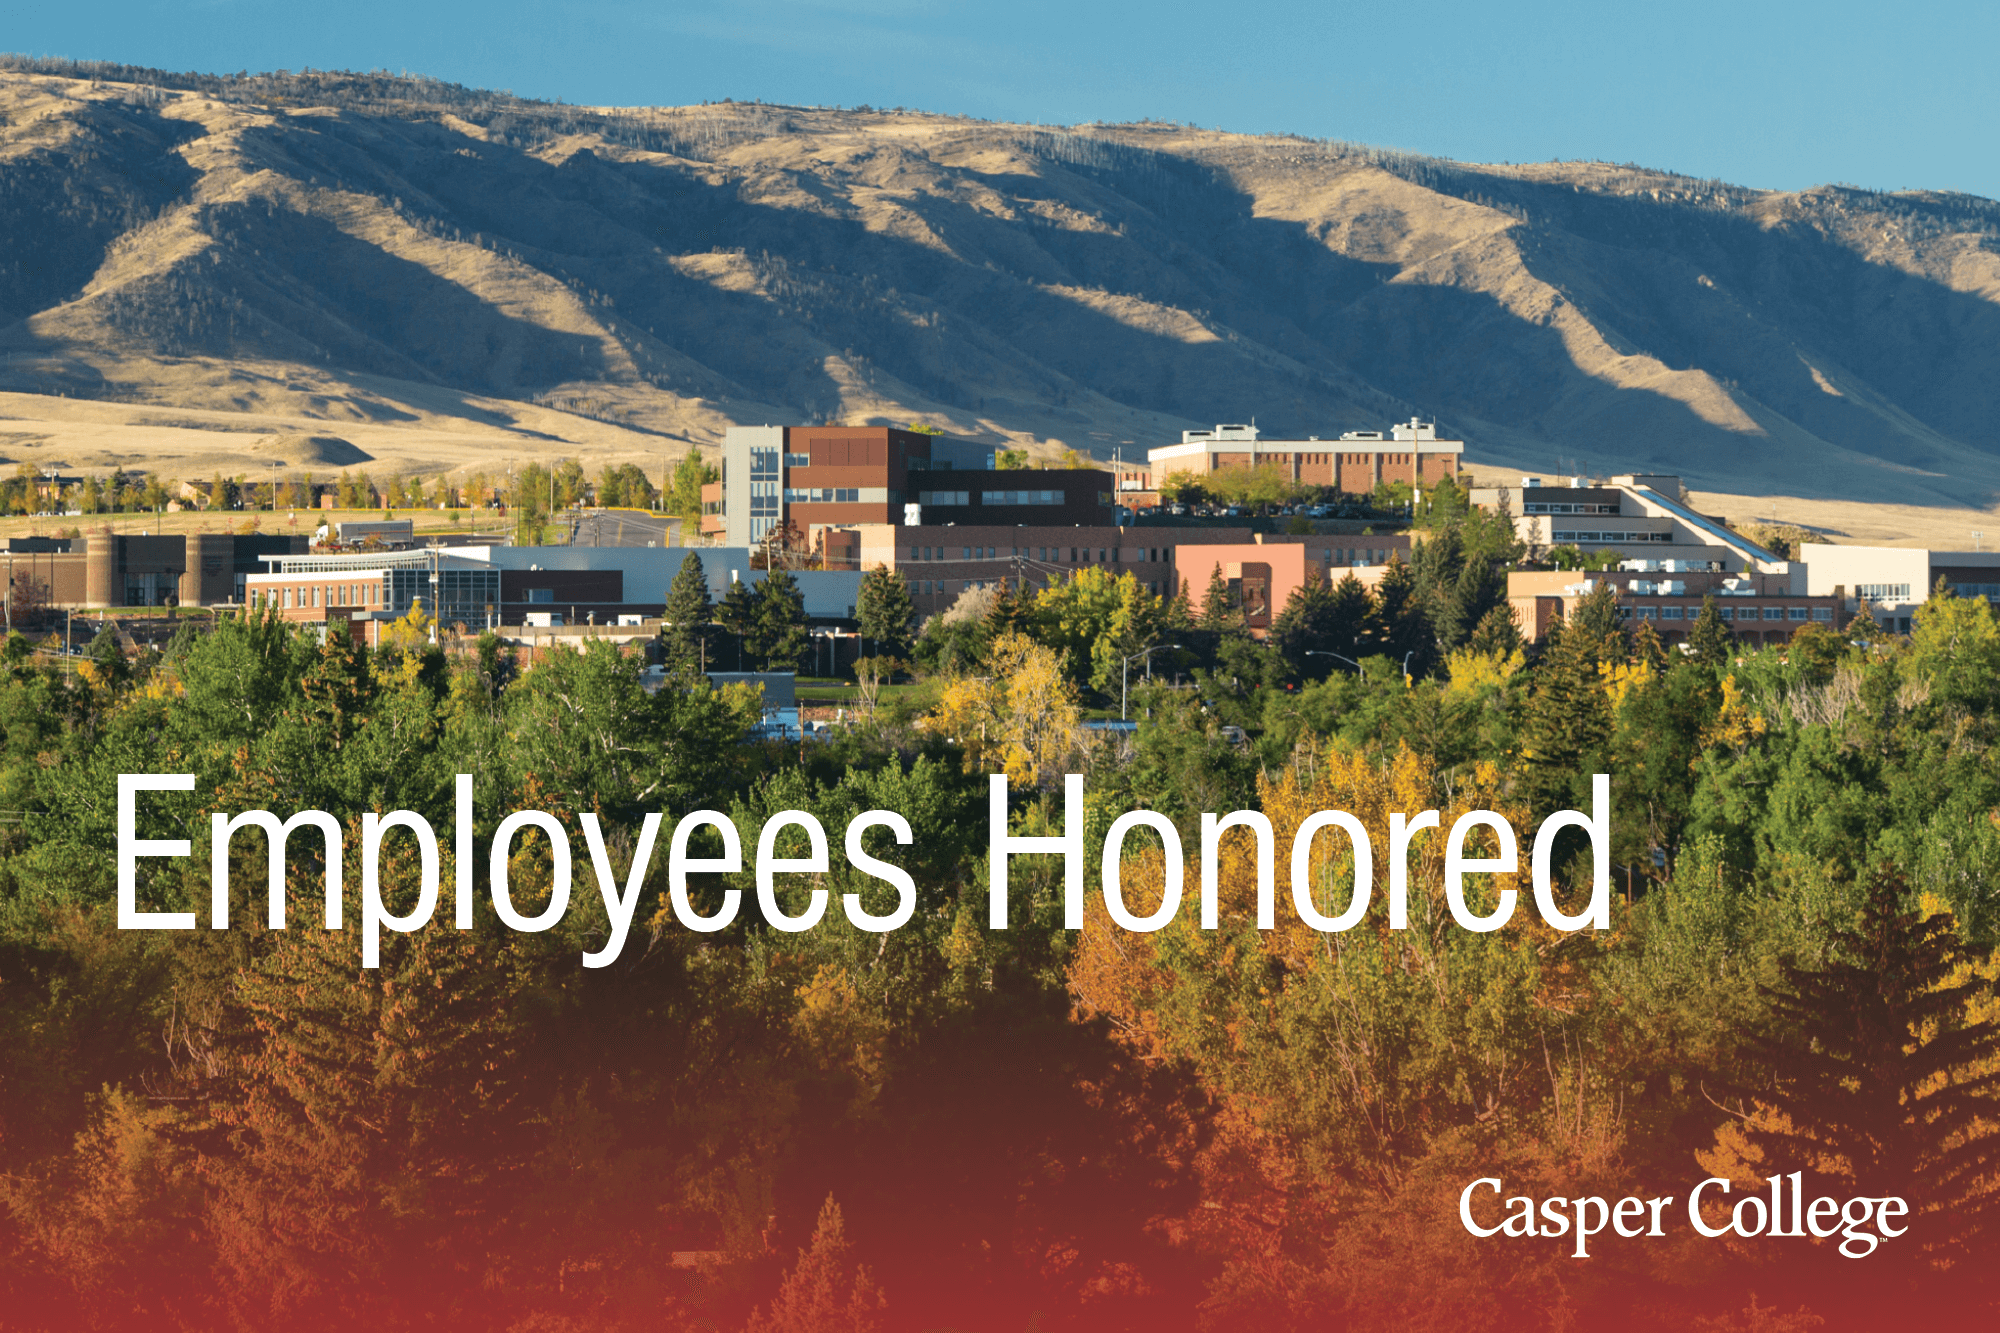 Photo of Casper College campus with the words "Employees Honored."